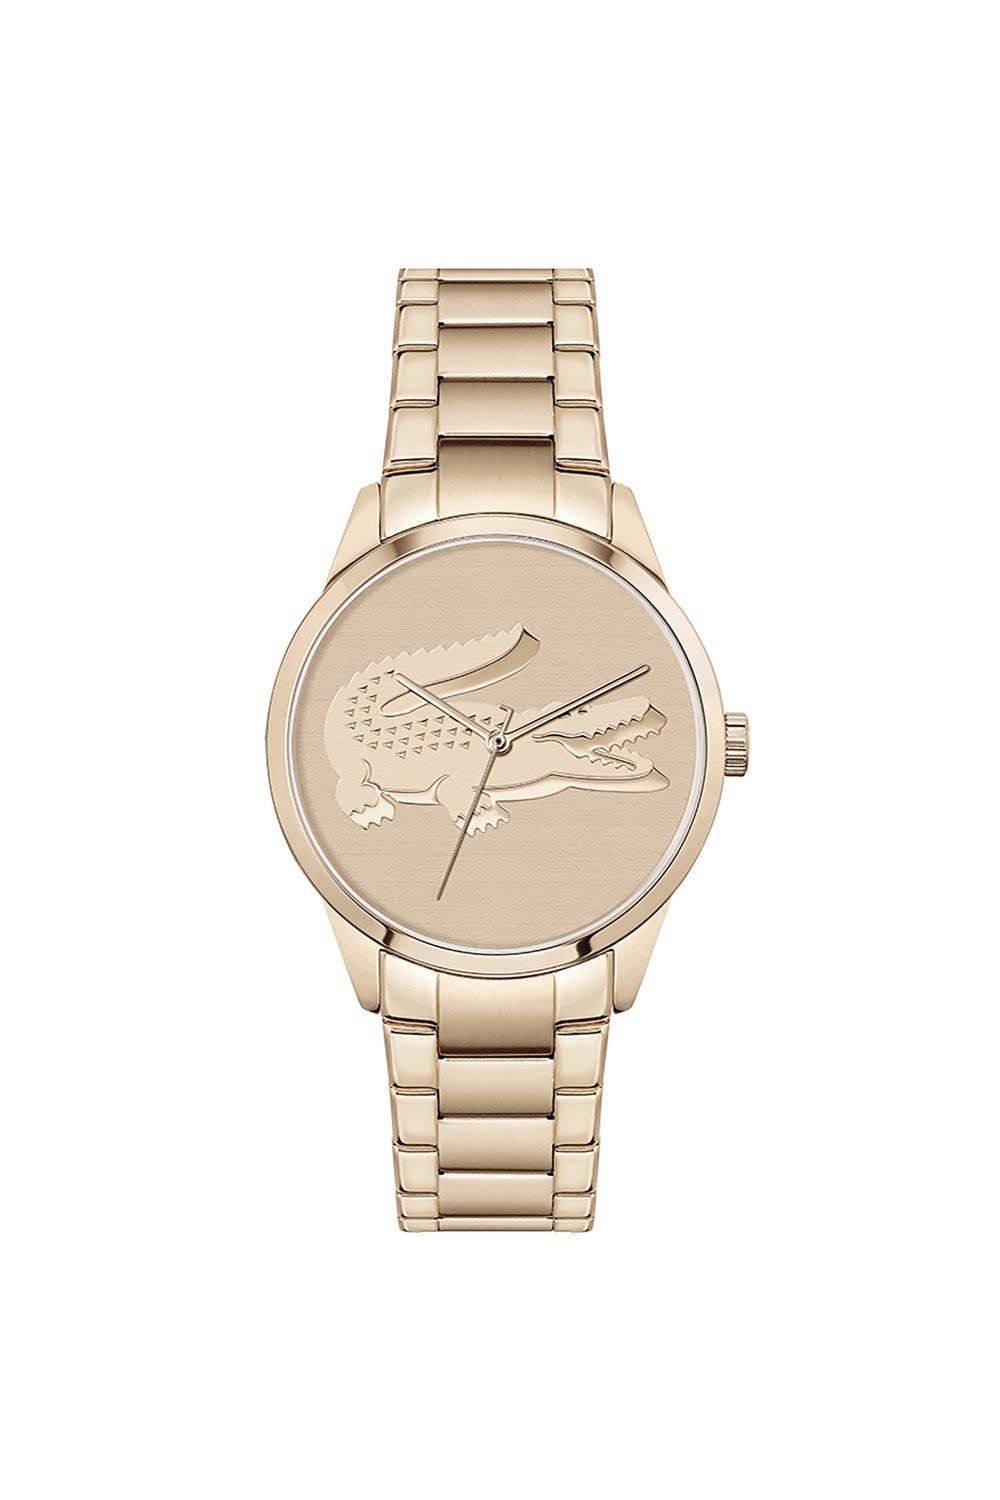 ladycroc plated stainless steel fashion analogue watch - 2001172